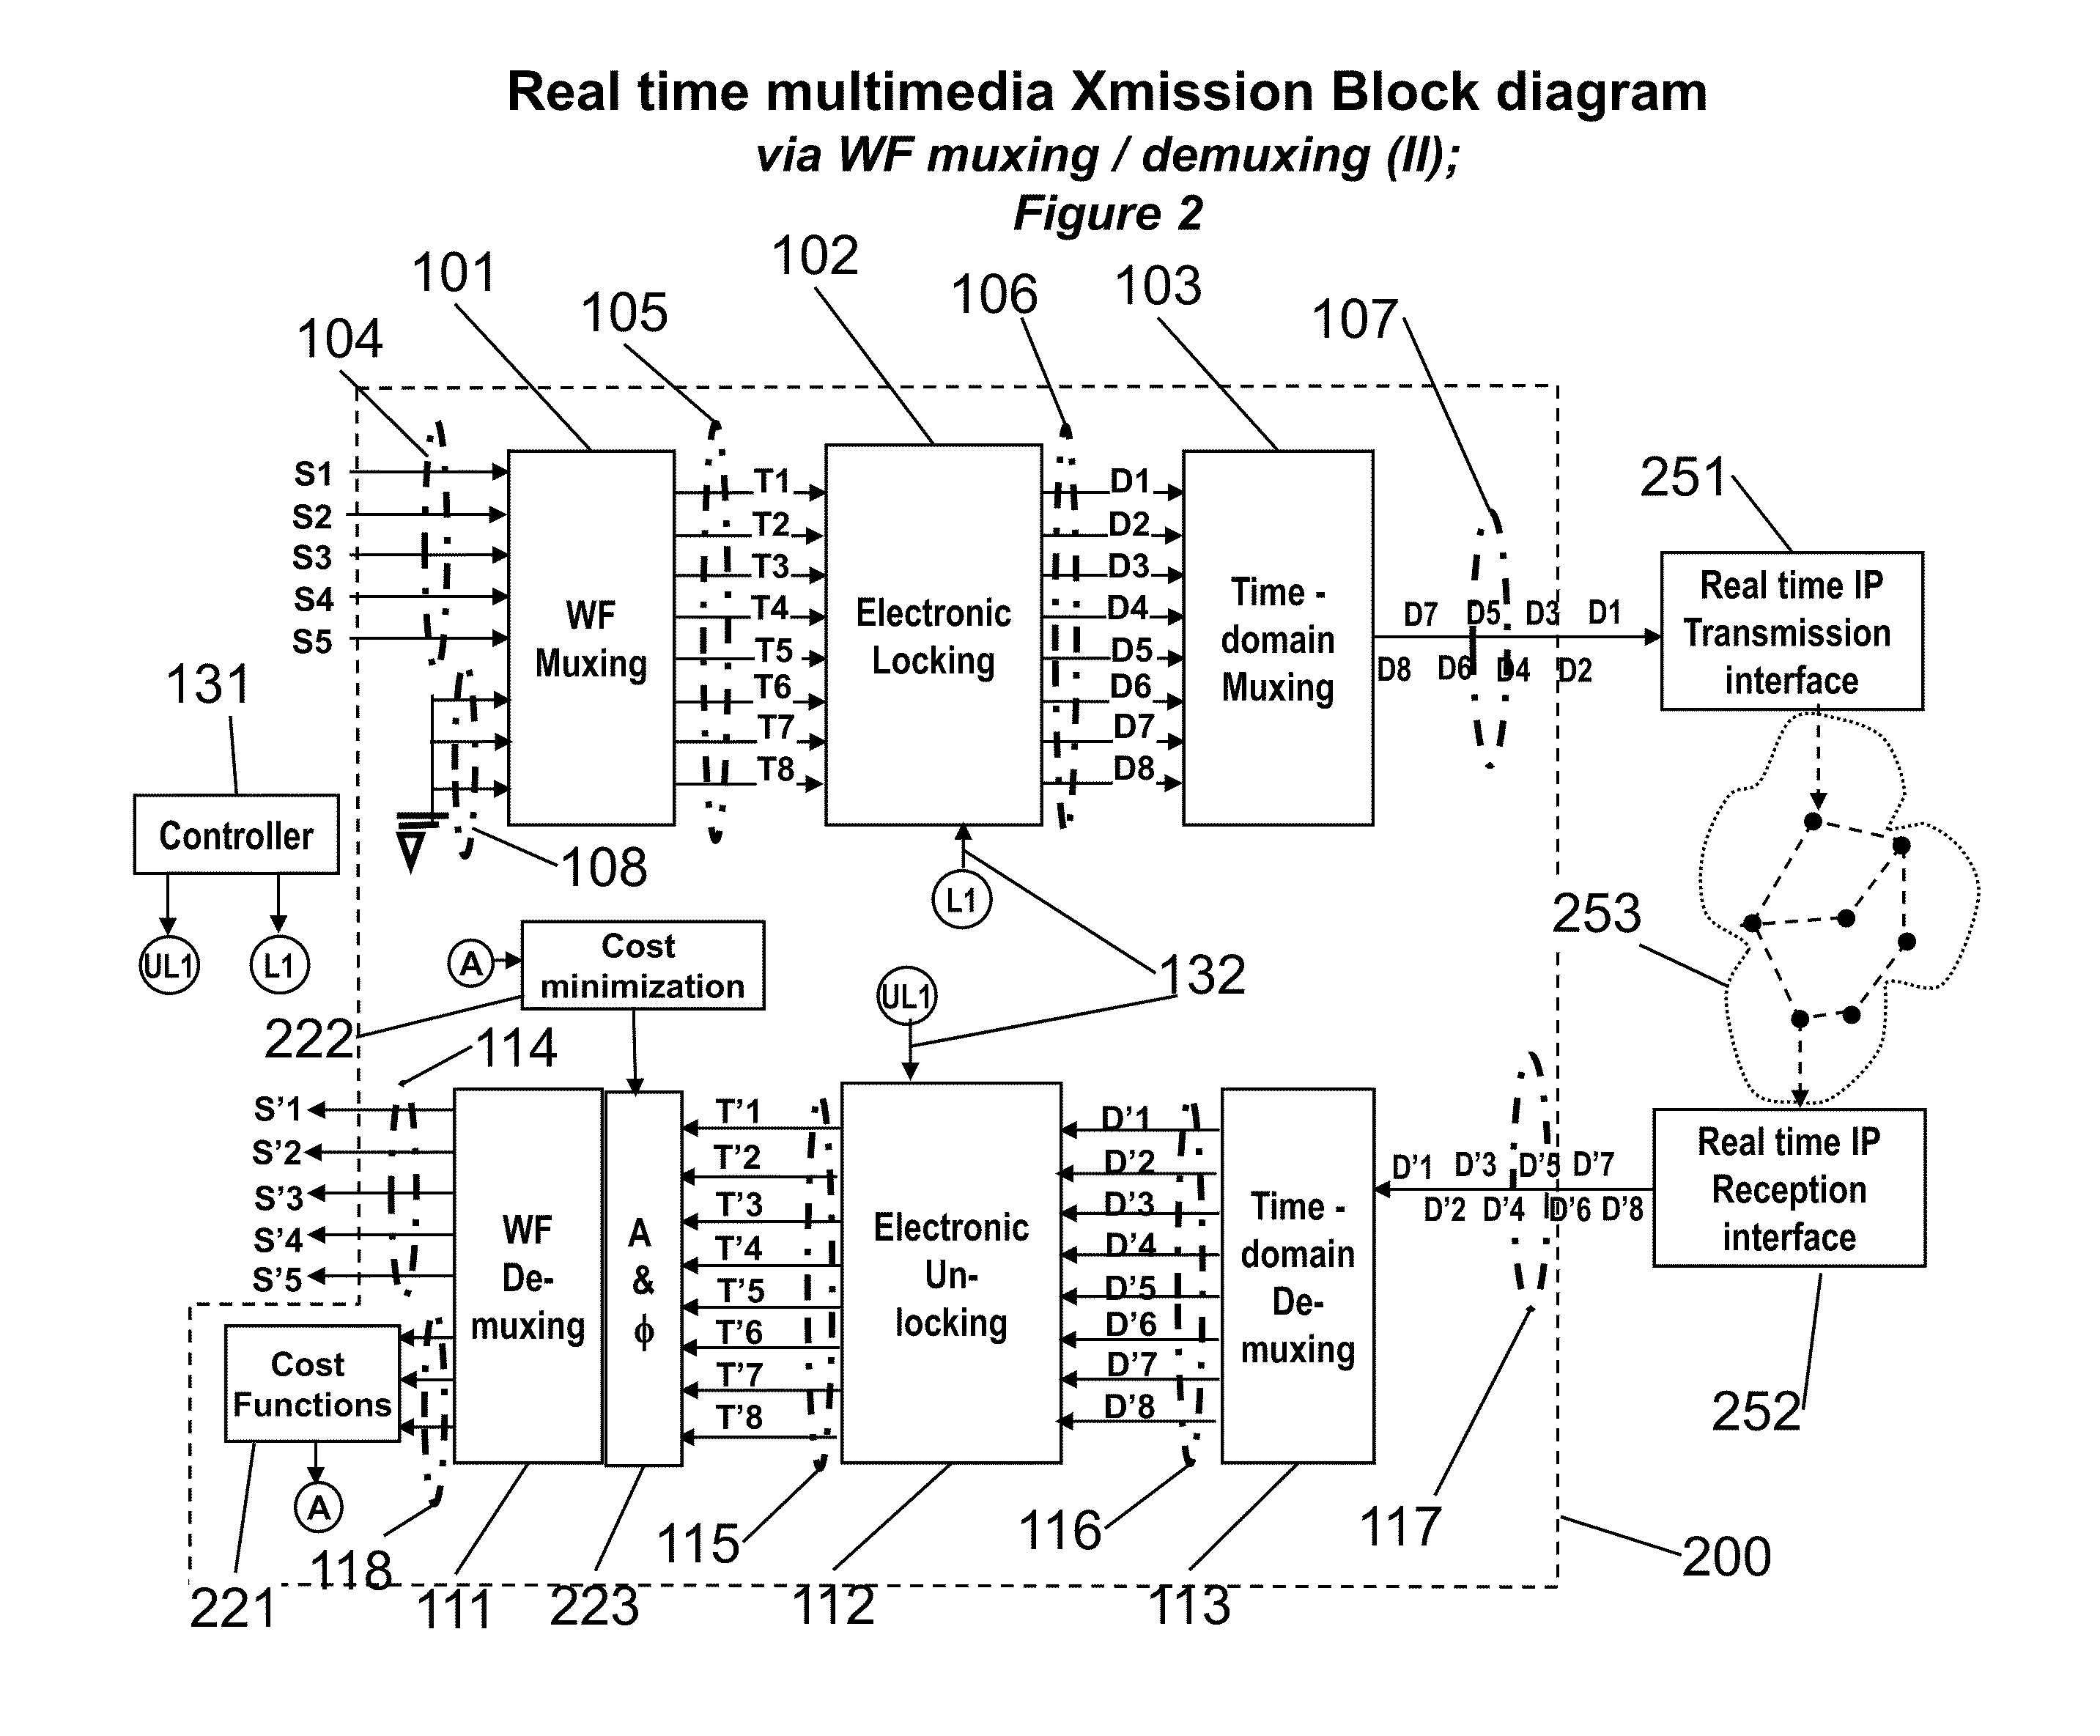 Novel Karaoke and Multi-Channel Data Recording / Transmission Techniques via Wavefront Multiplexing and Demultiplexing